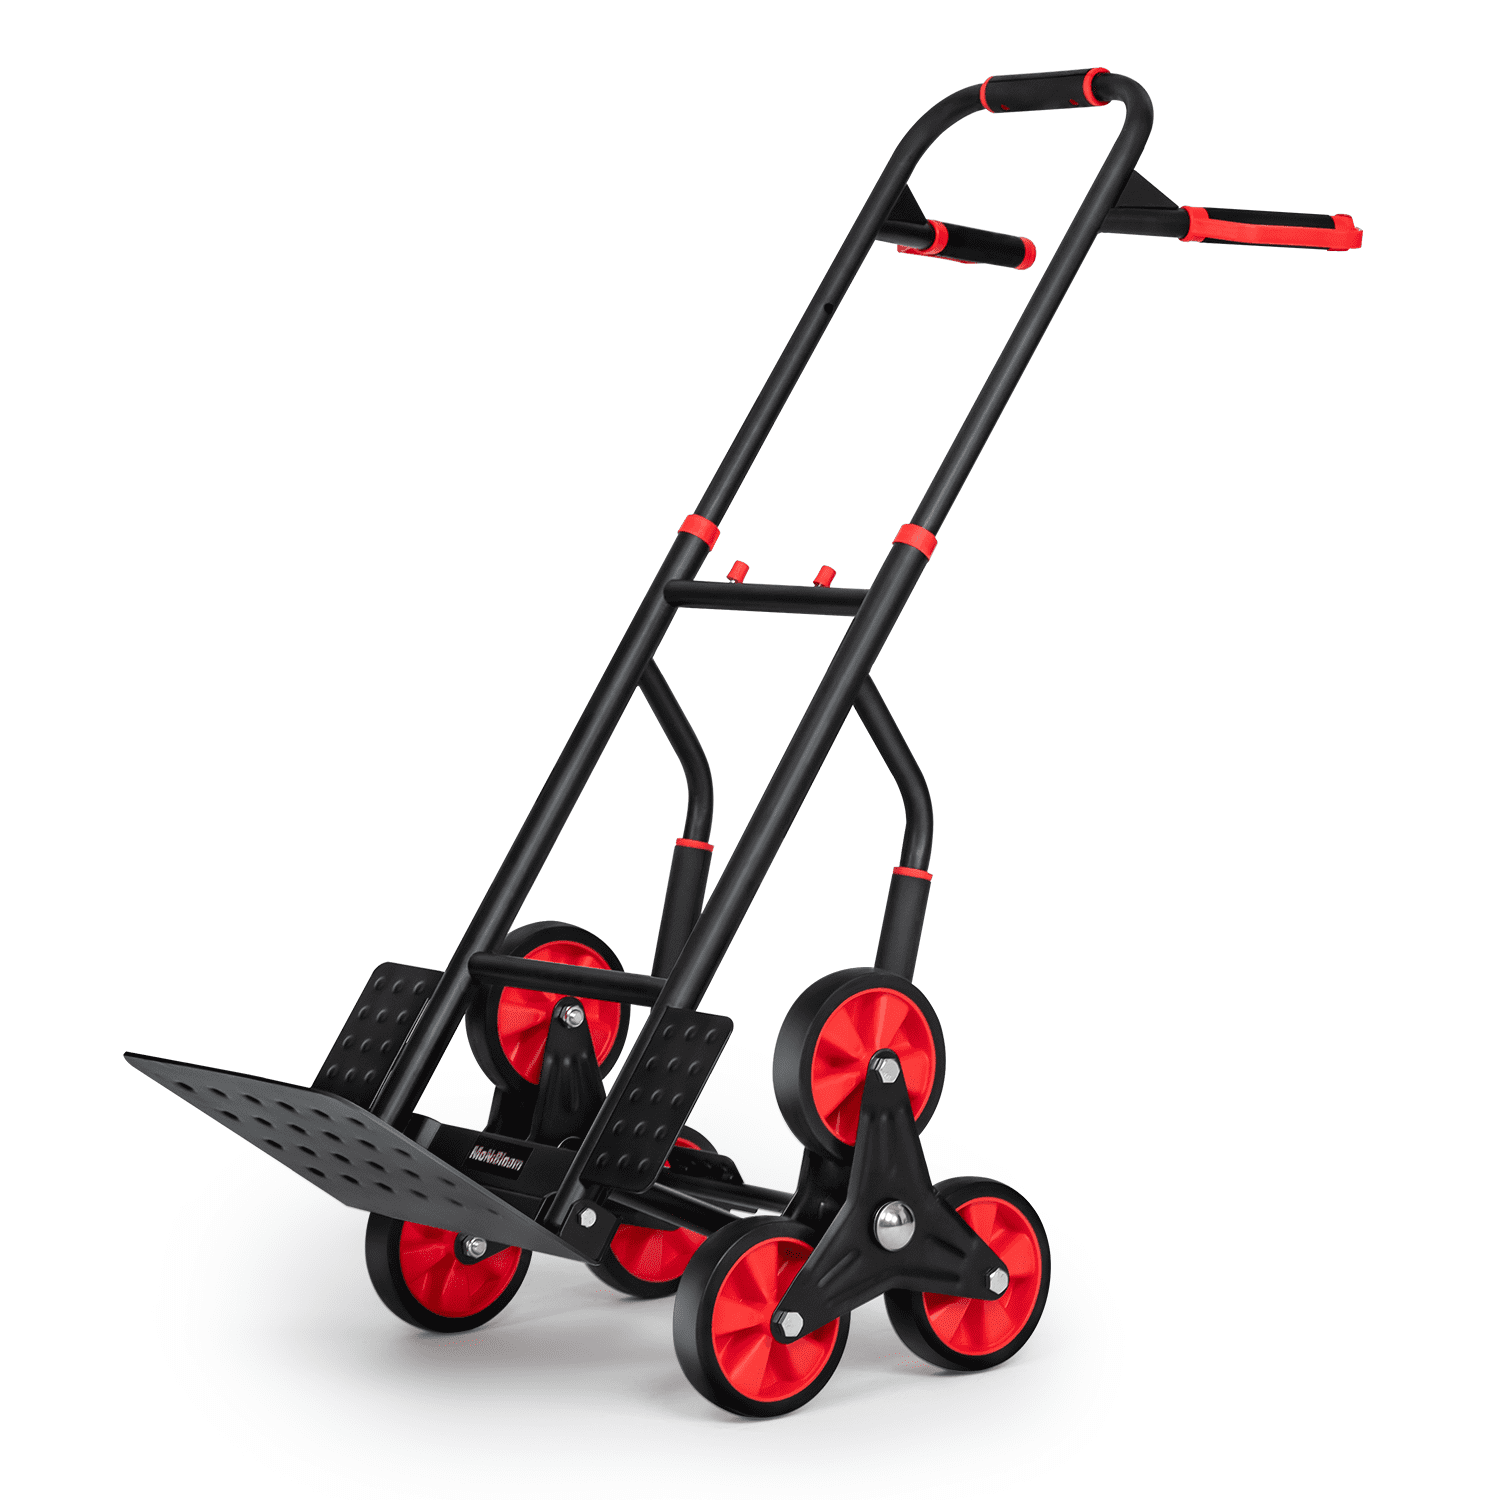 Details about   Folding Hand Truck Stair Climber Hand Truck Aluminum Cart Dolly Moving 2 Wheel 